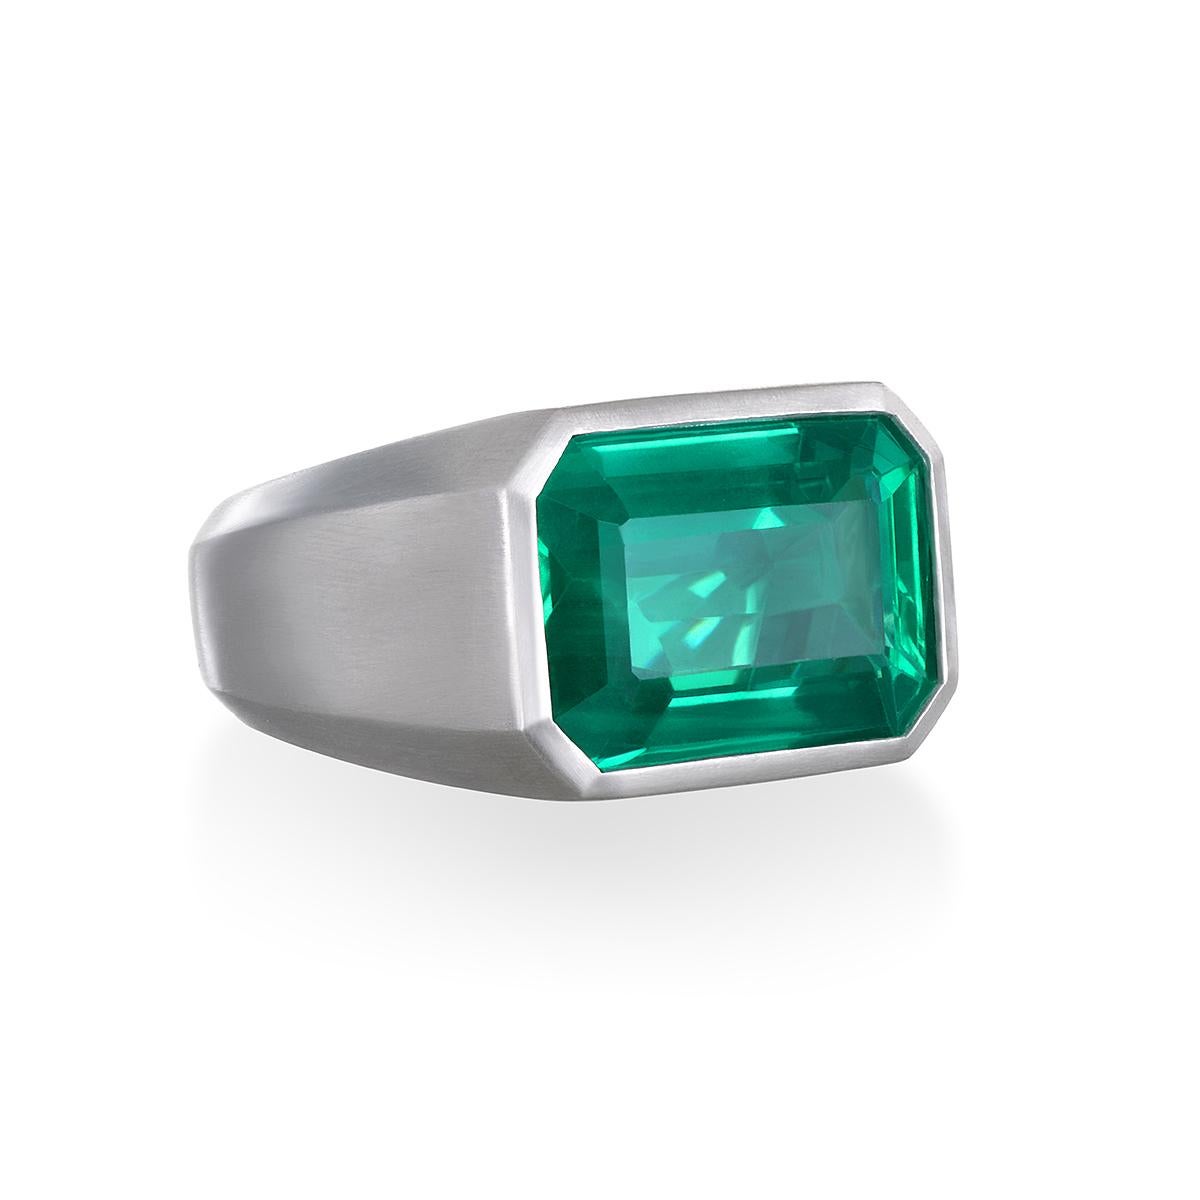 Faye Kim's Platinum Emerald Bezel Ring, with its clean, understated design and smooth, polished matte finish, showcases a stunning Zambian Emerald. The ring's slightly chunky and effortlessly chic style enables it to be incorporated into virtually